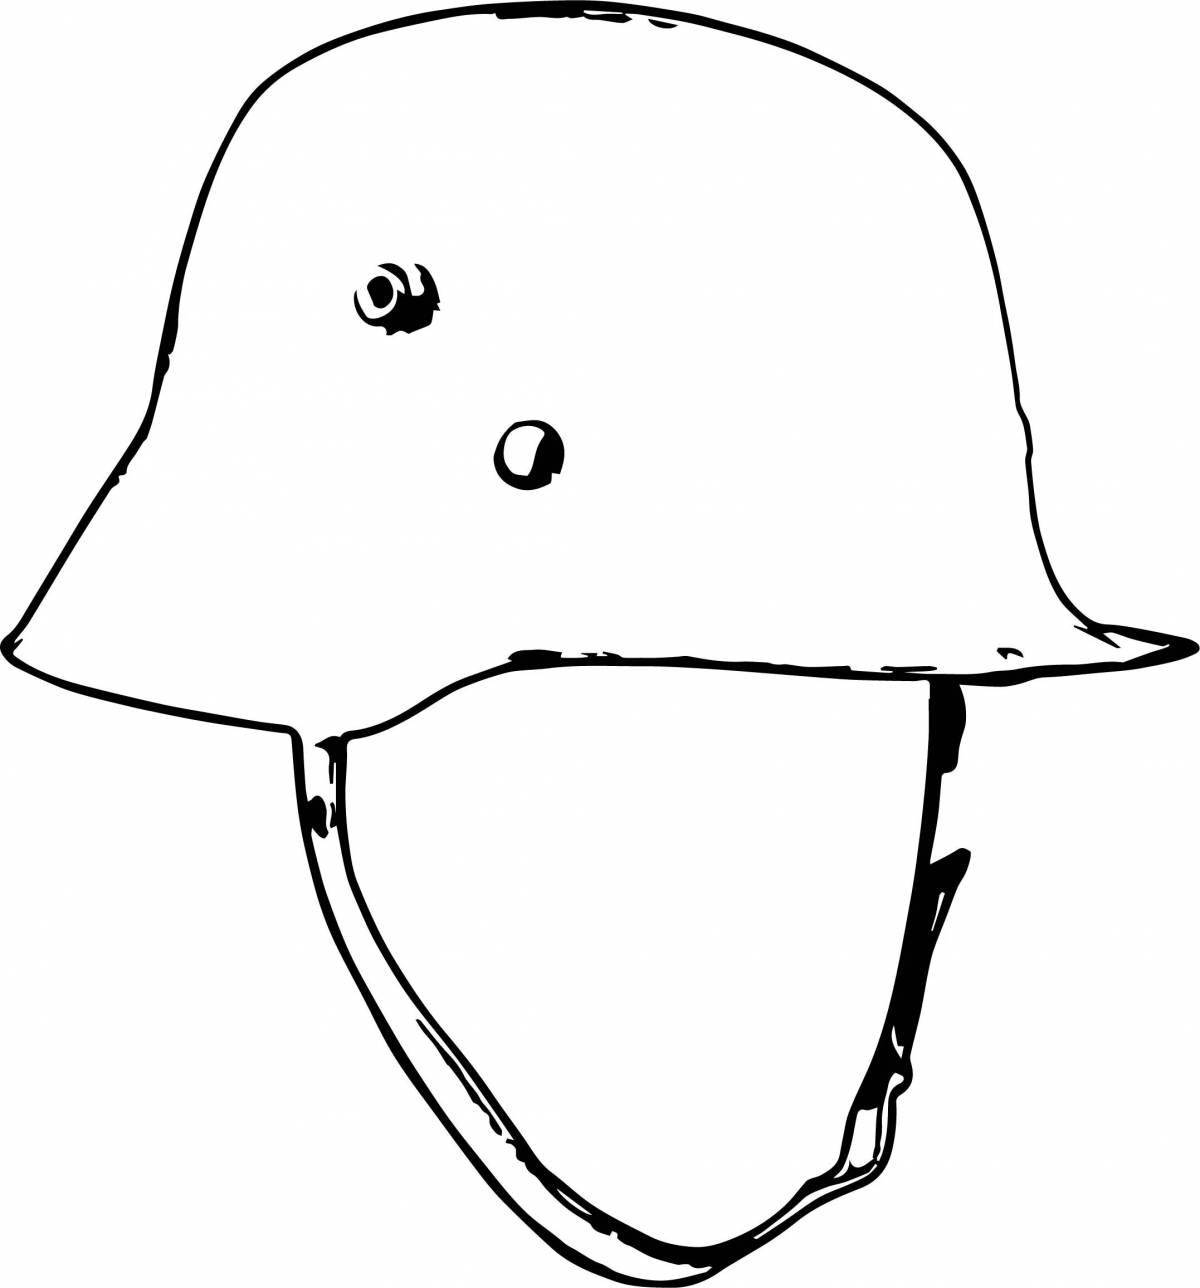 Shiny soldier's helmet coloring book